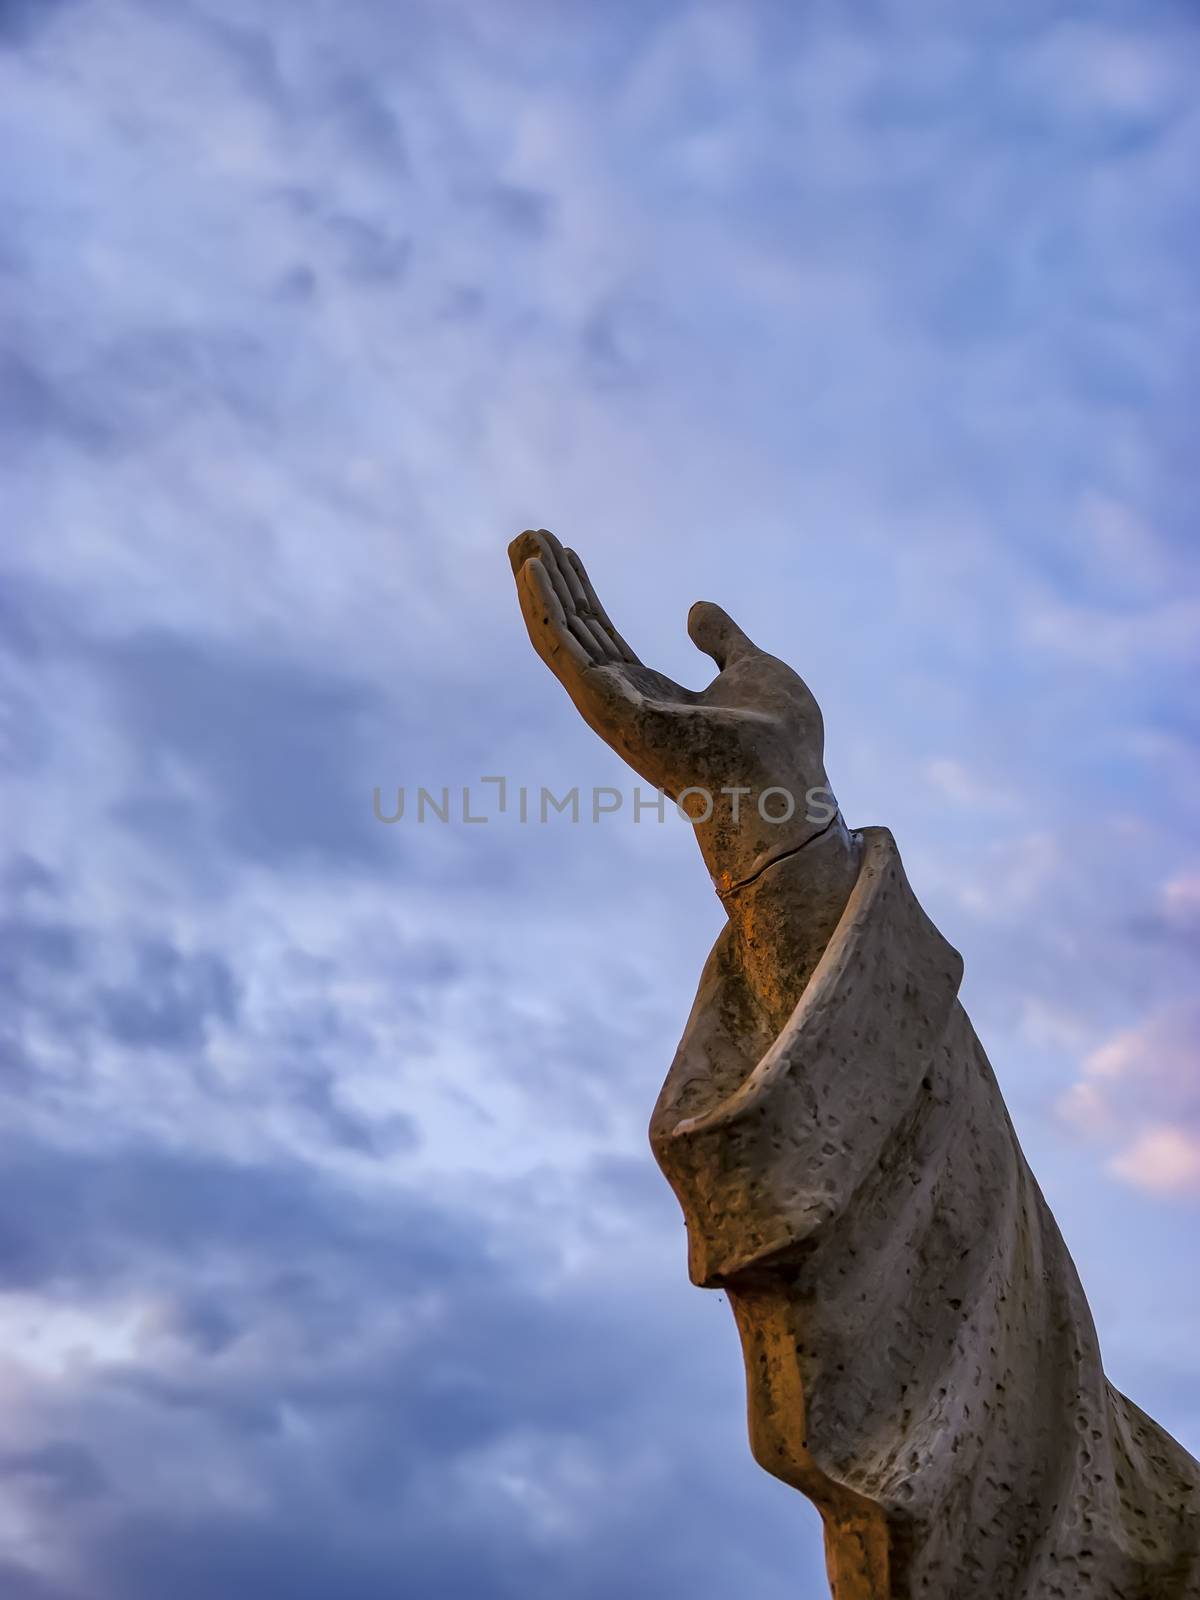 Hand of Jesus statue on the road on the island Corfu, Greece by ankarb